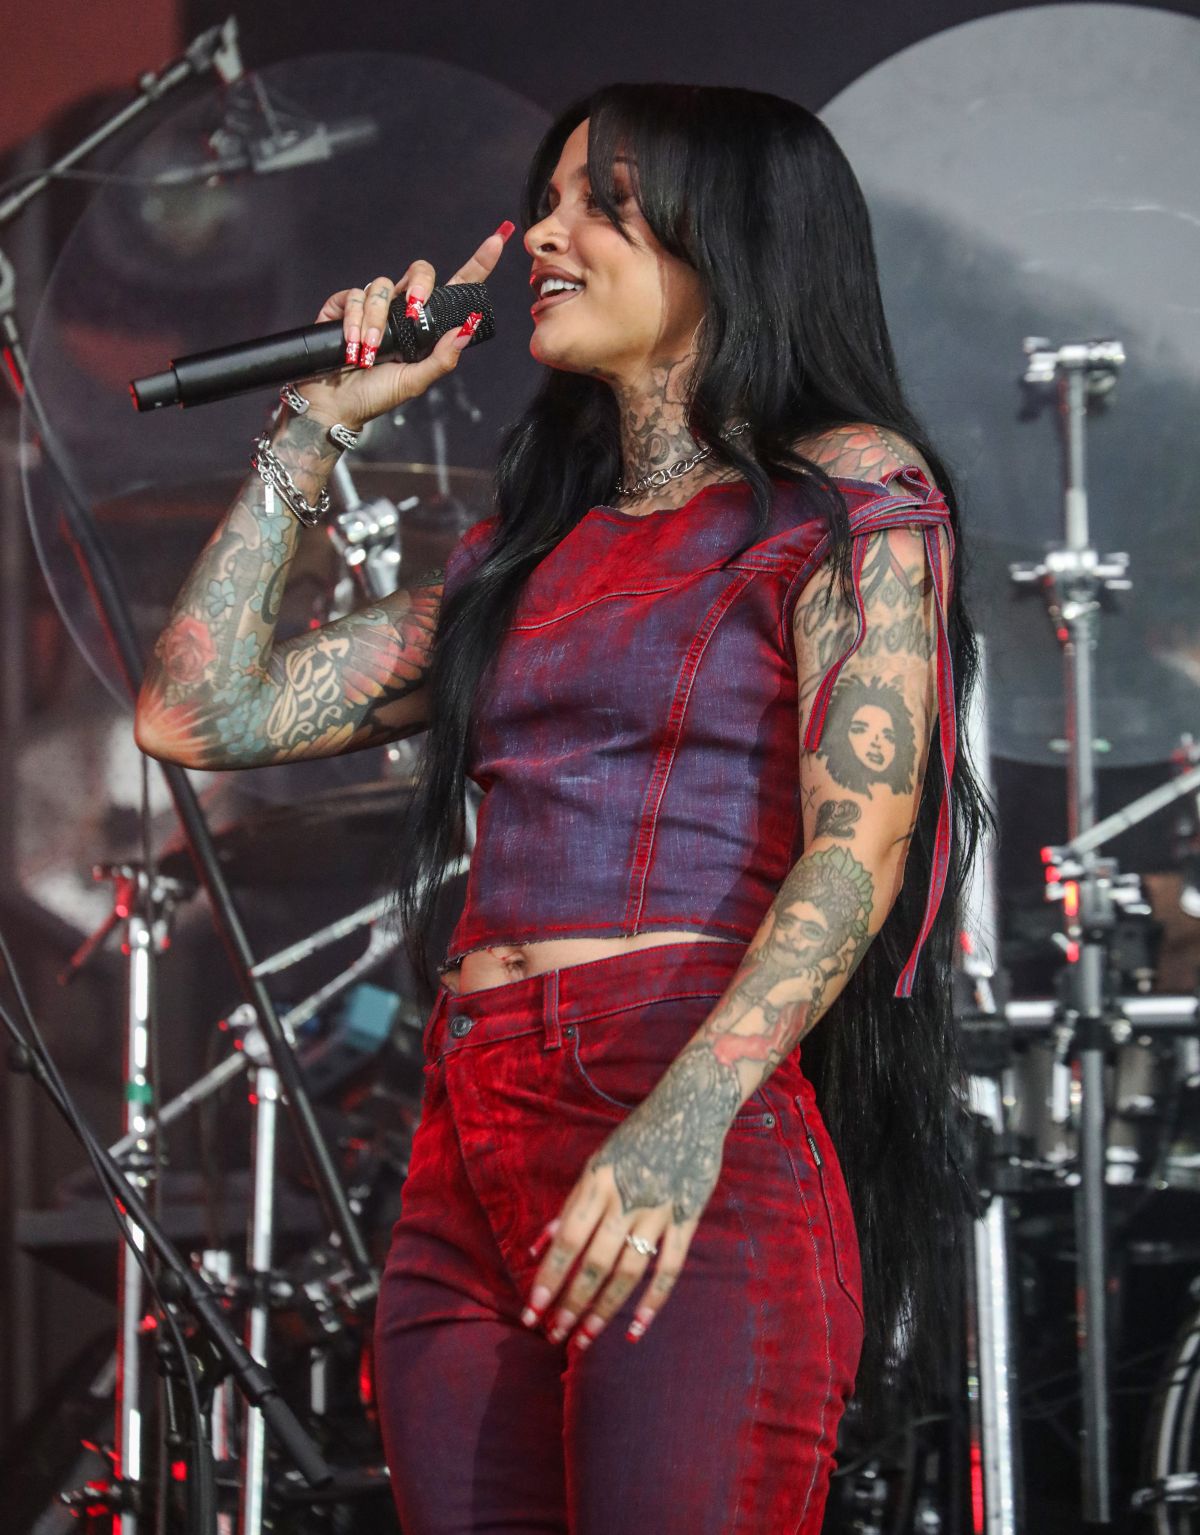 kehlani will be performing at the All Points East music festival